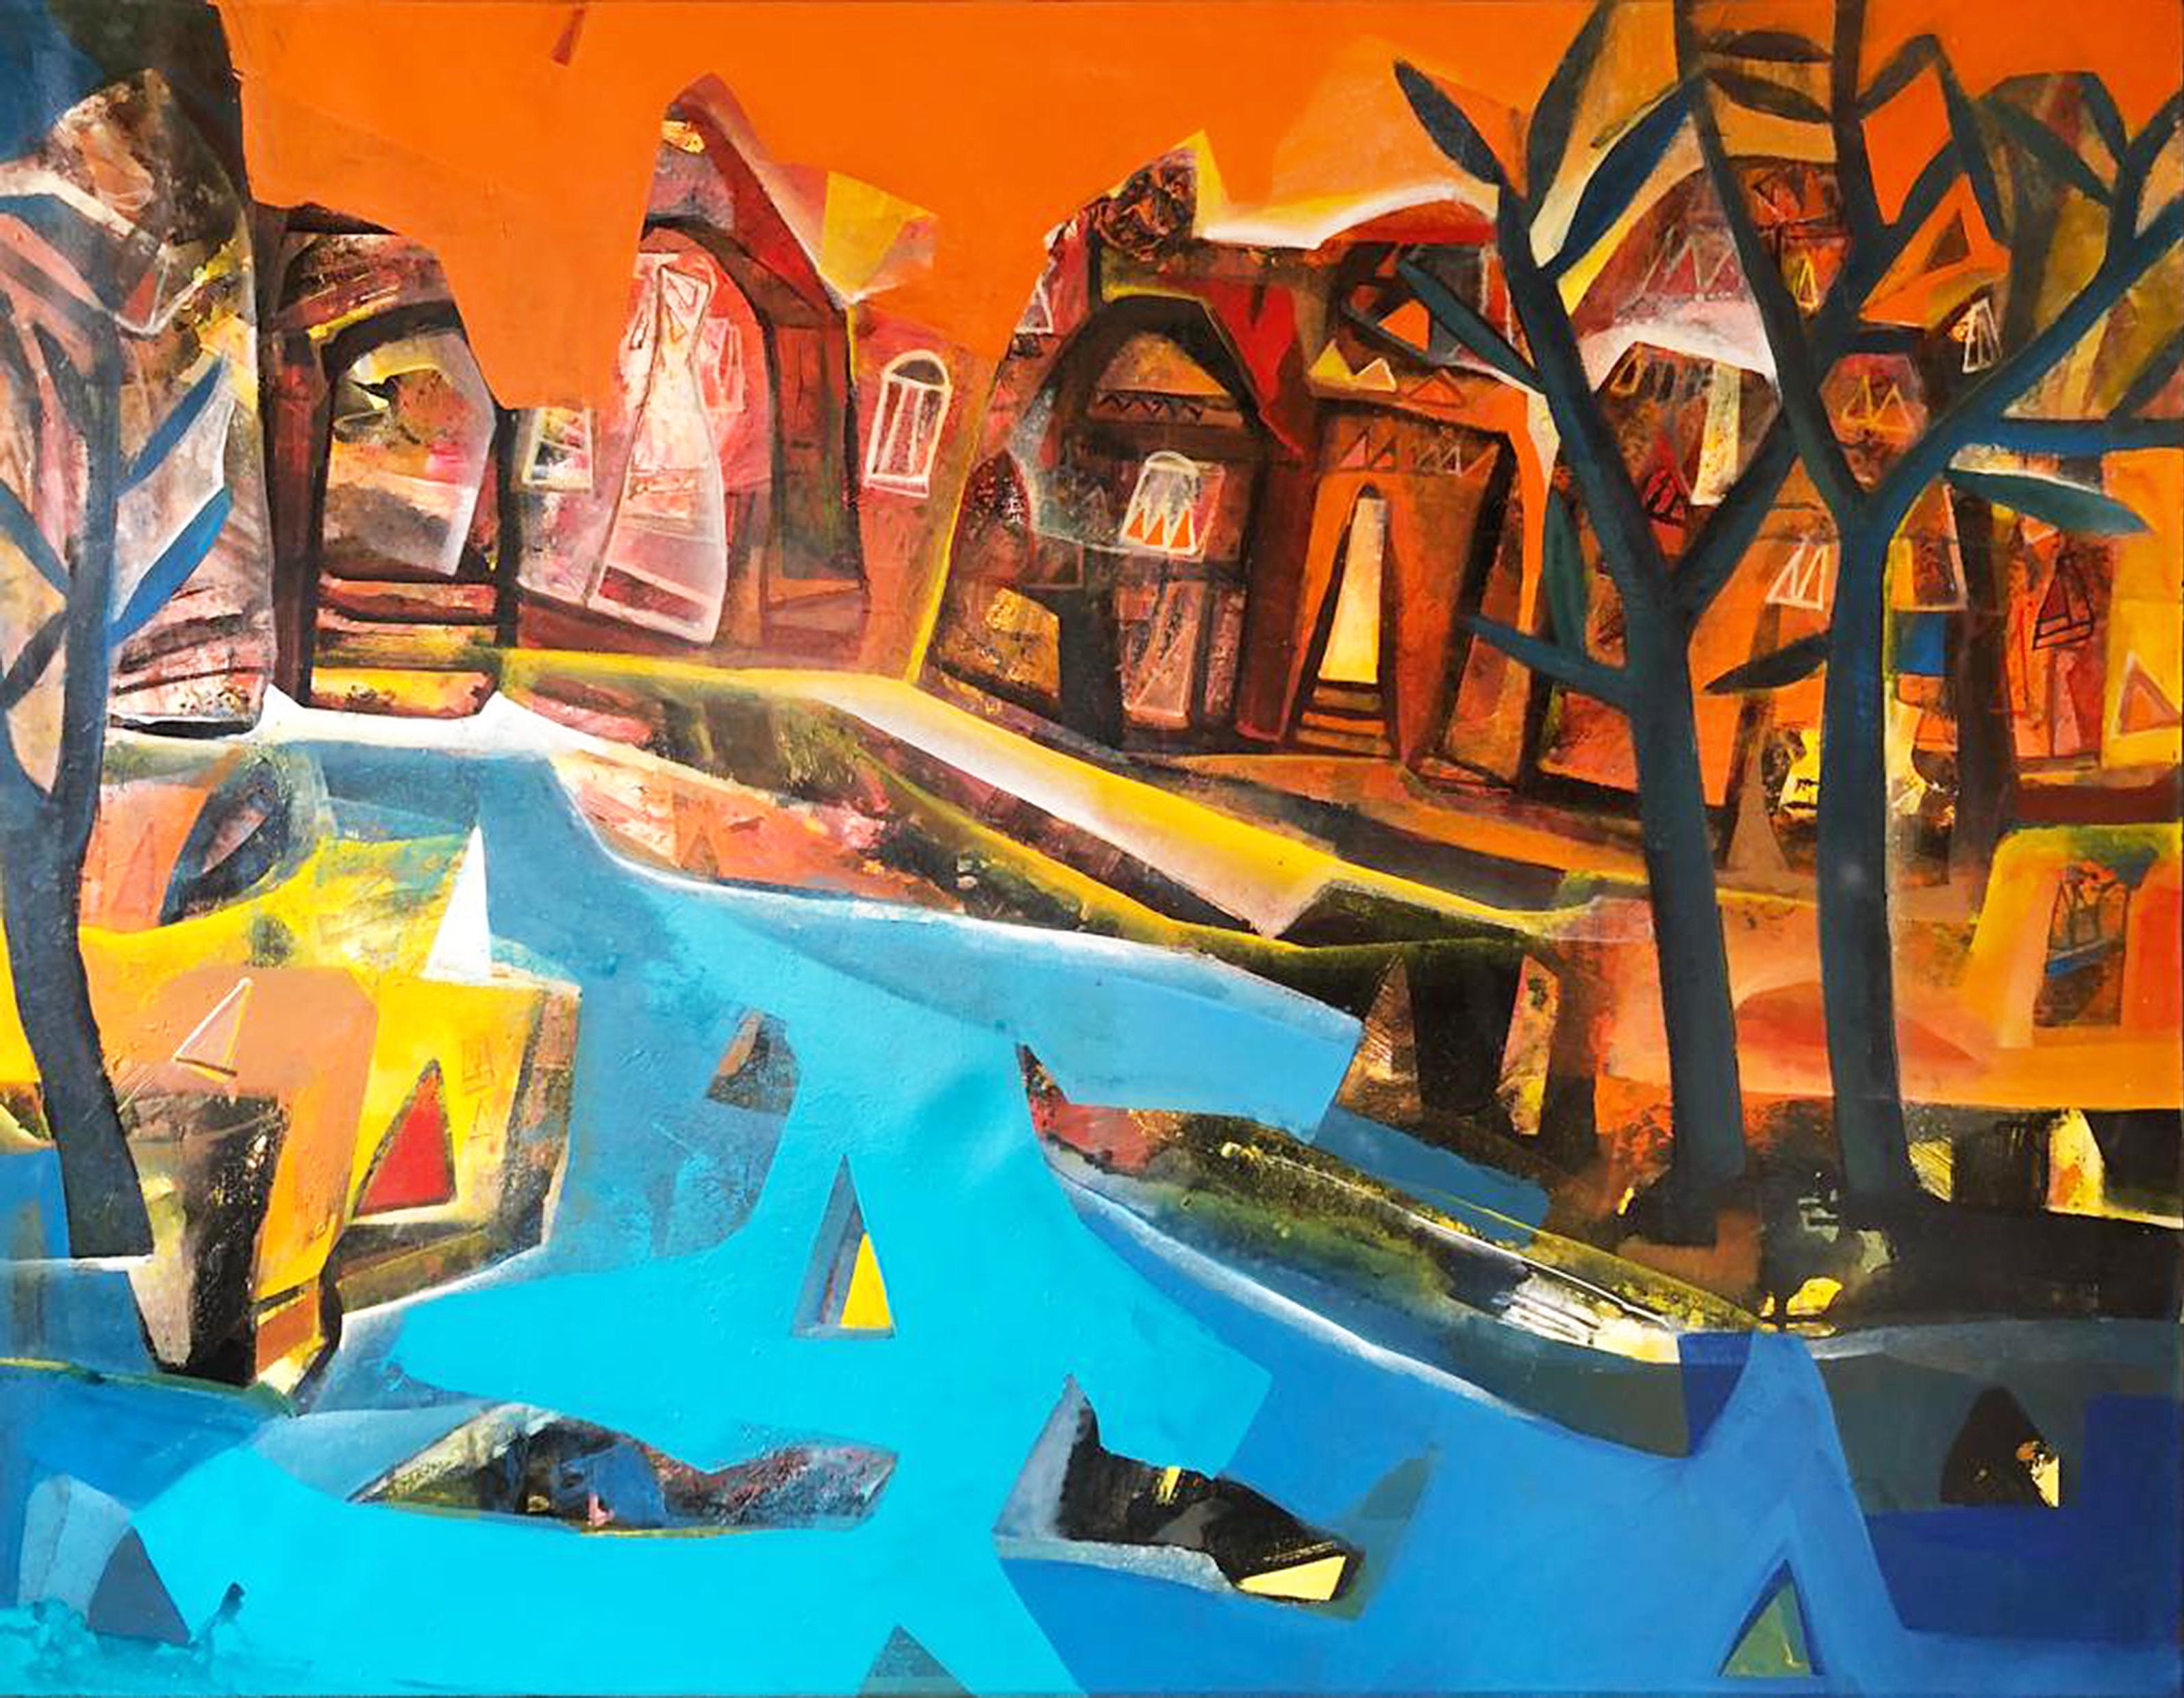 Tapas Ghosal Interior Painting - Cityscape, Abstract, Acrylic on Canvas, Blue, Red by Indian Artist "In Stock" 